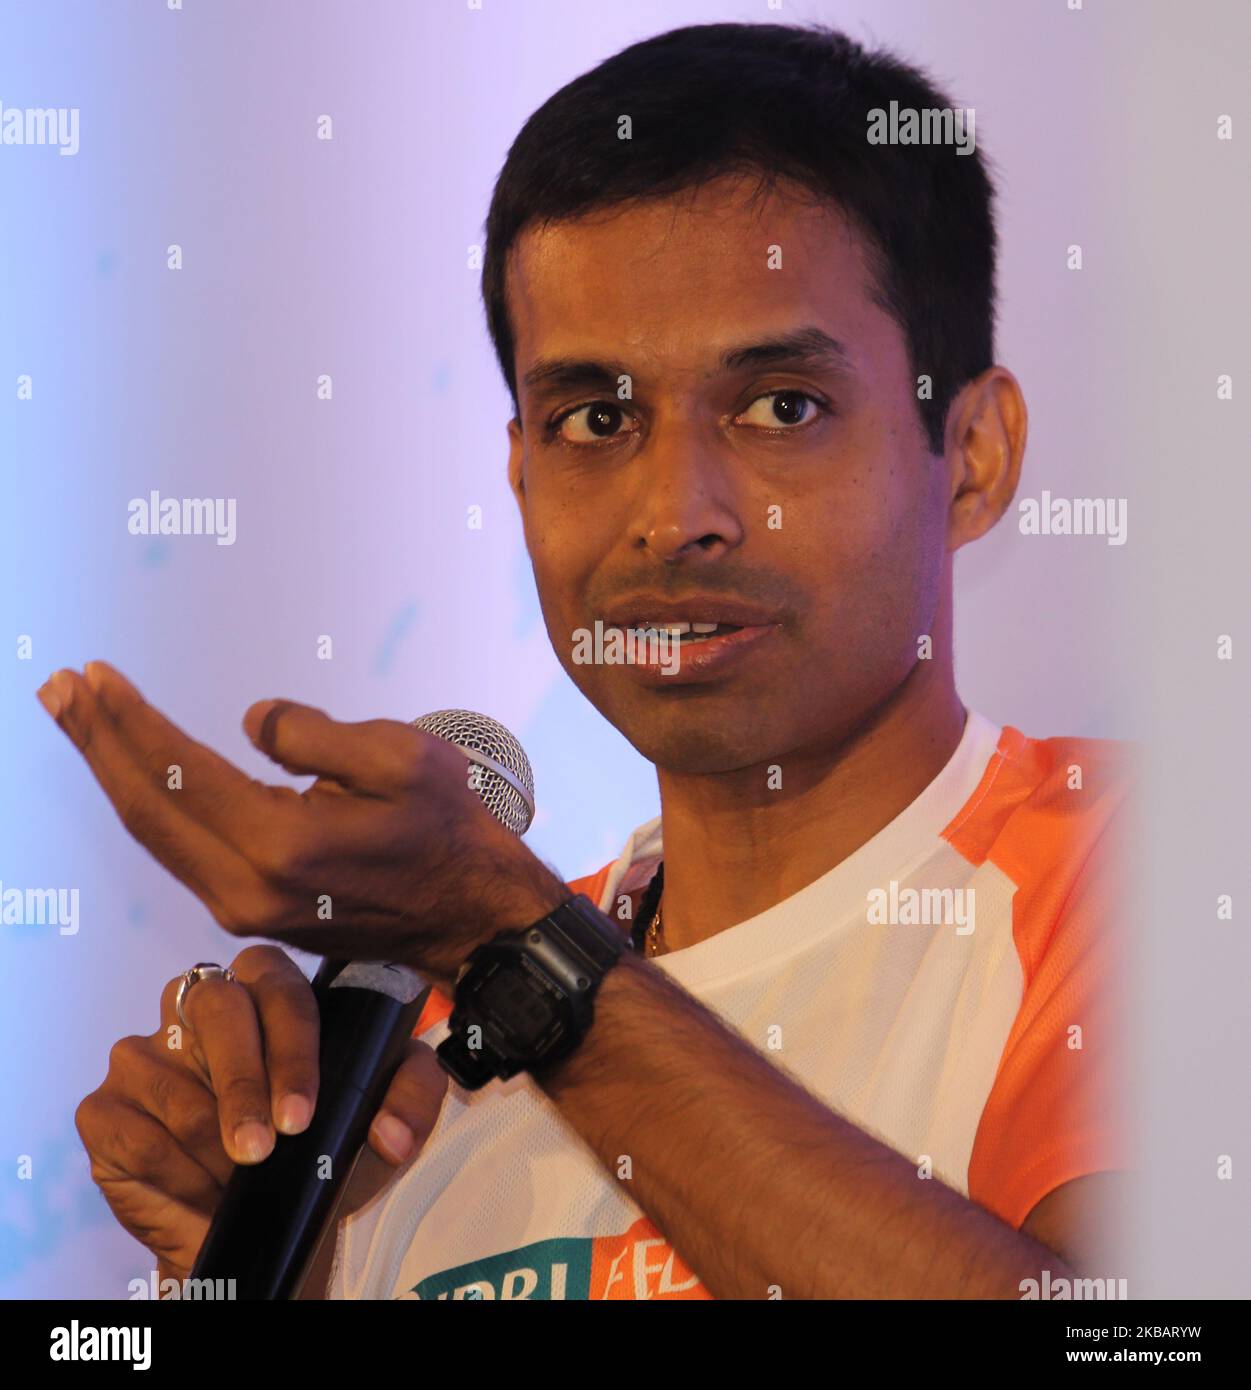 Former Indian badminton player Pullela Gopichand speaks during a launch of an initiative ‘Football Mania’ by IDBI Federal Life Insurance in Mumbai, India on 12 November 2019. The initiative aimed to provide top-quality football coaching to over 10,000 kid in the city. (Photo by Himanshu Bhatt/NurPhoto) Stock Photo